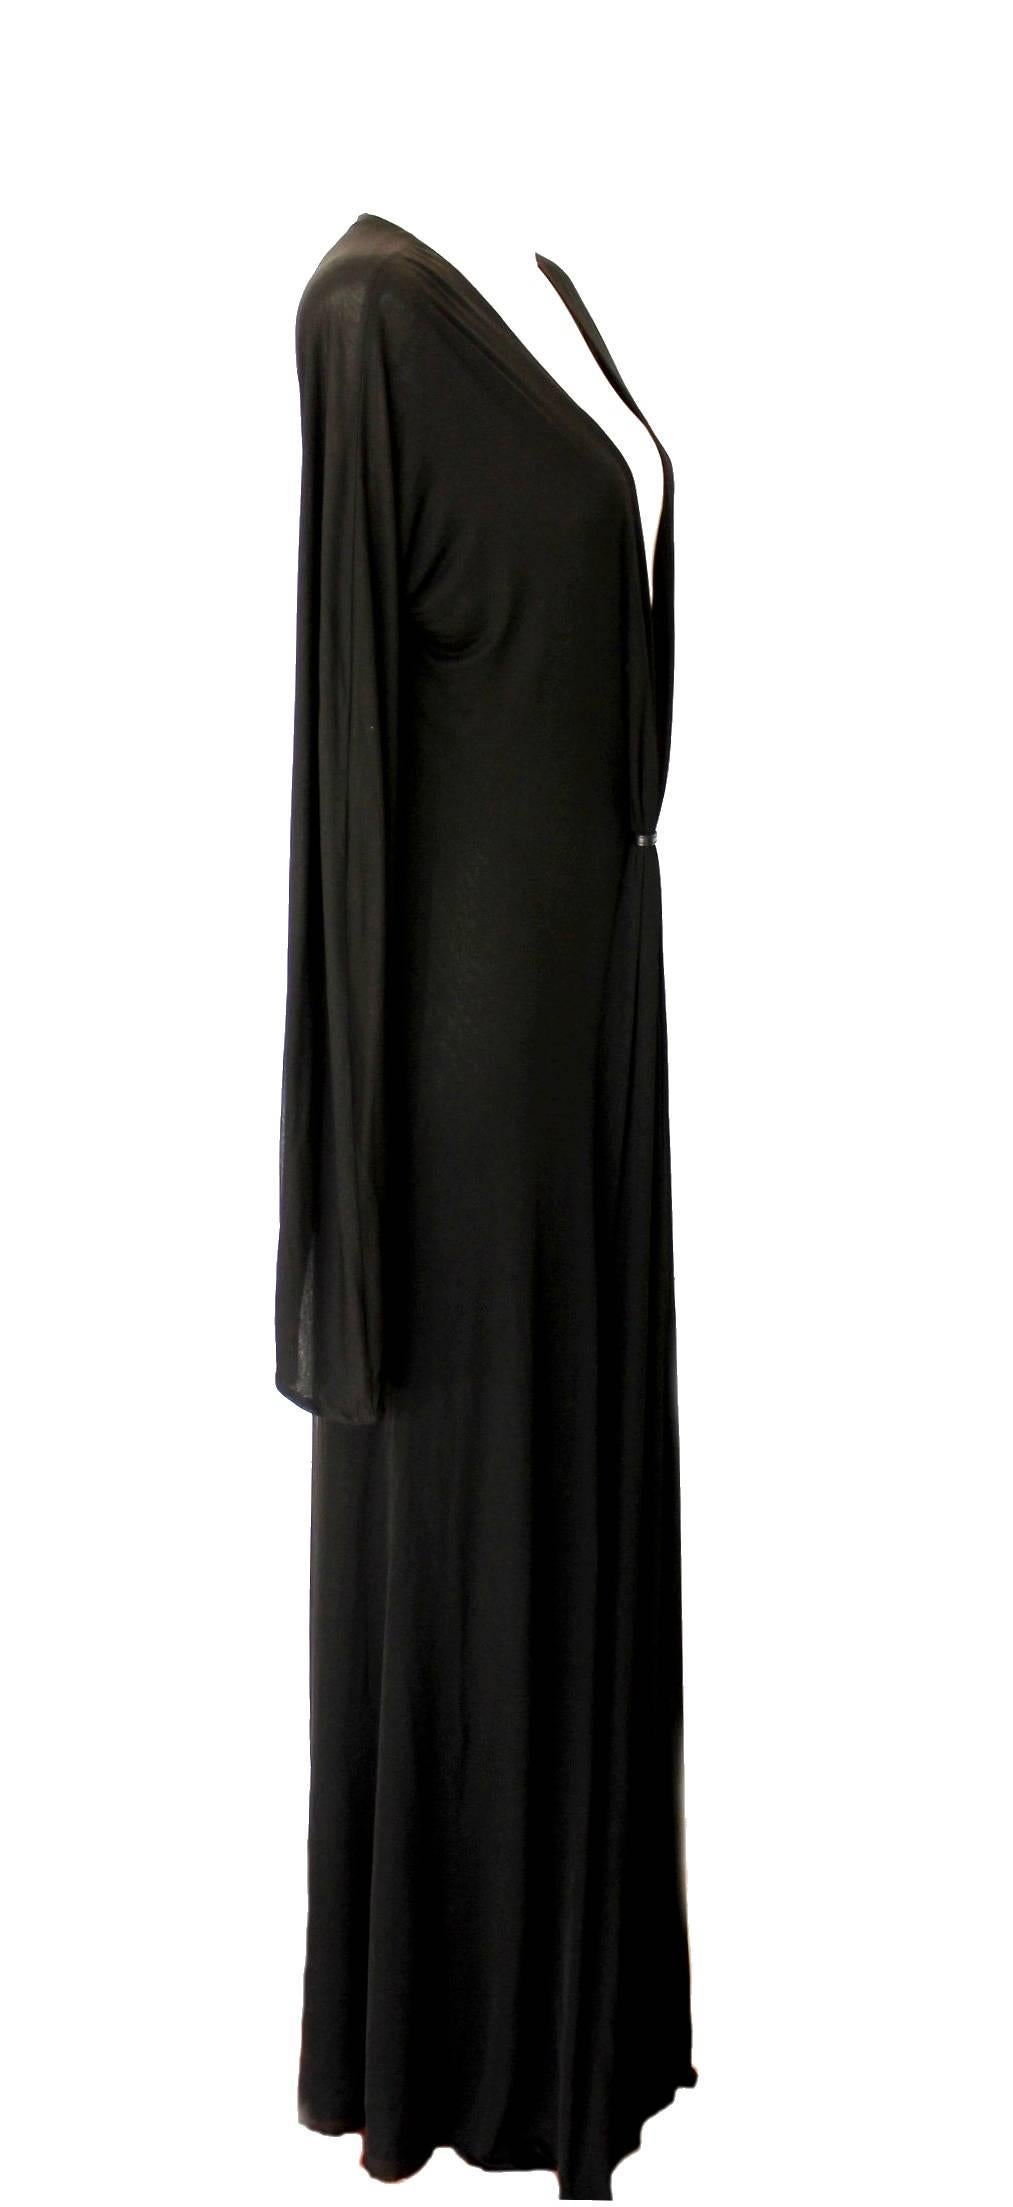 Beautiful GUCCI by Tom Ford gown - simple but so subtile & sexy!
Long sleeves
Extremely deep draped neckline, hold together by a tiny leather band - so sexy, so Tom Ford!
Closes with long zipper on back
Long sleeves, can be opened with